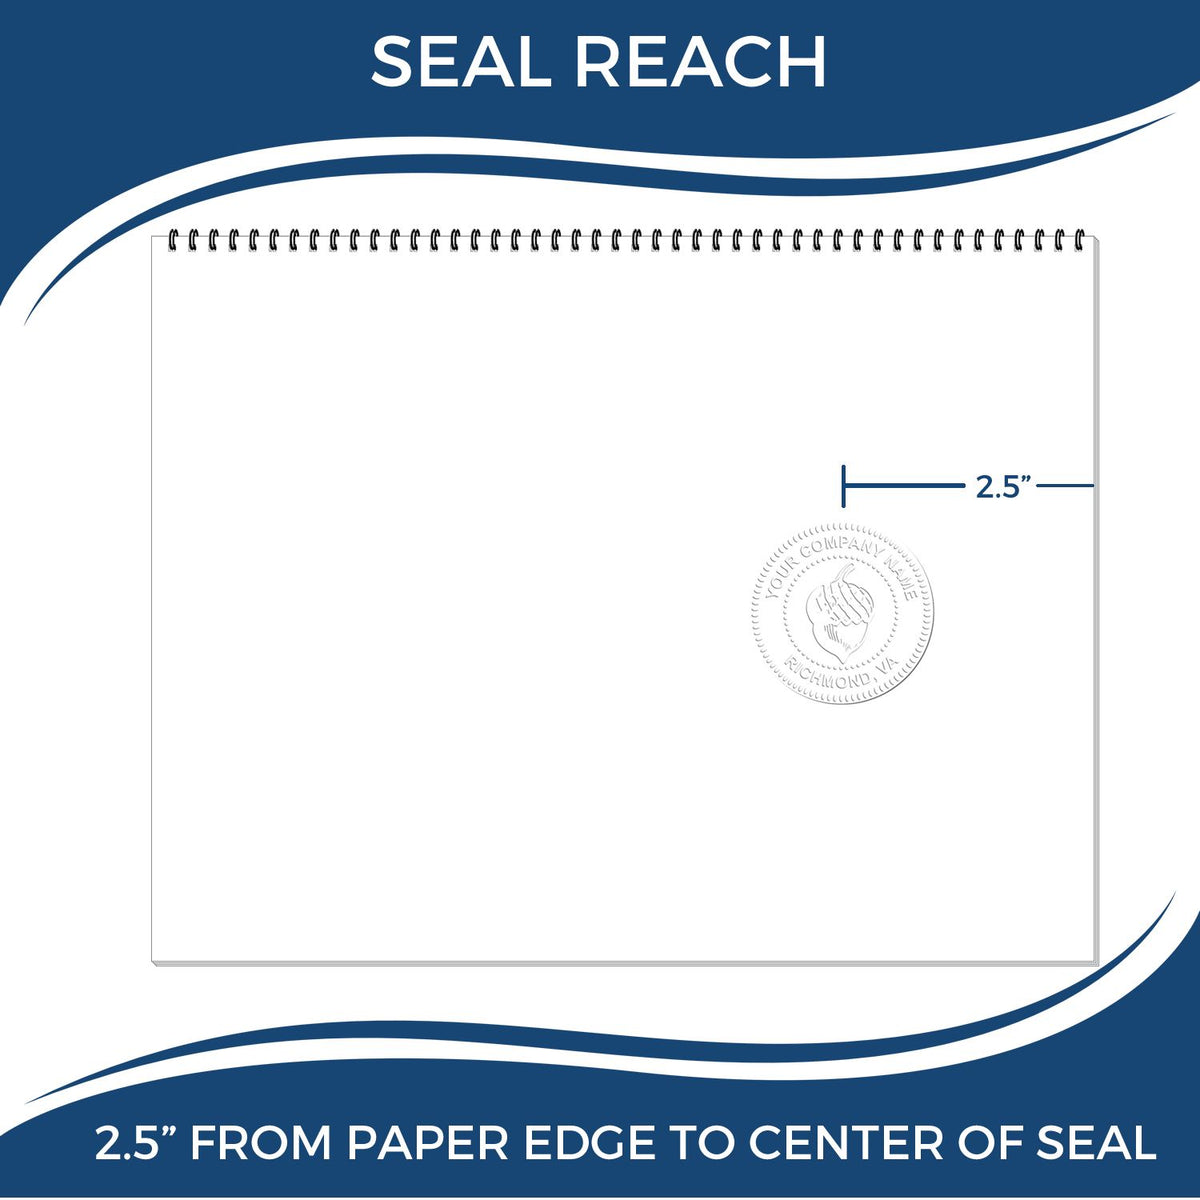 An infographic showing the seal reach which is represented by a ruler and a miniature seal image of the Heavy Duty Cast Iron Massachusetts Engineer Seal Embosser